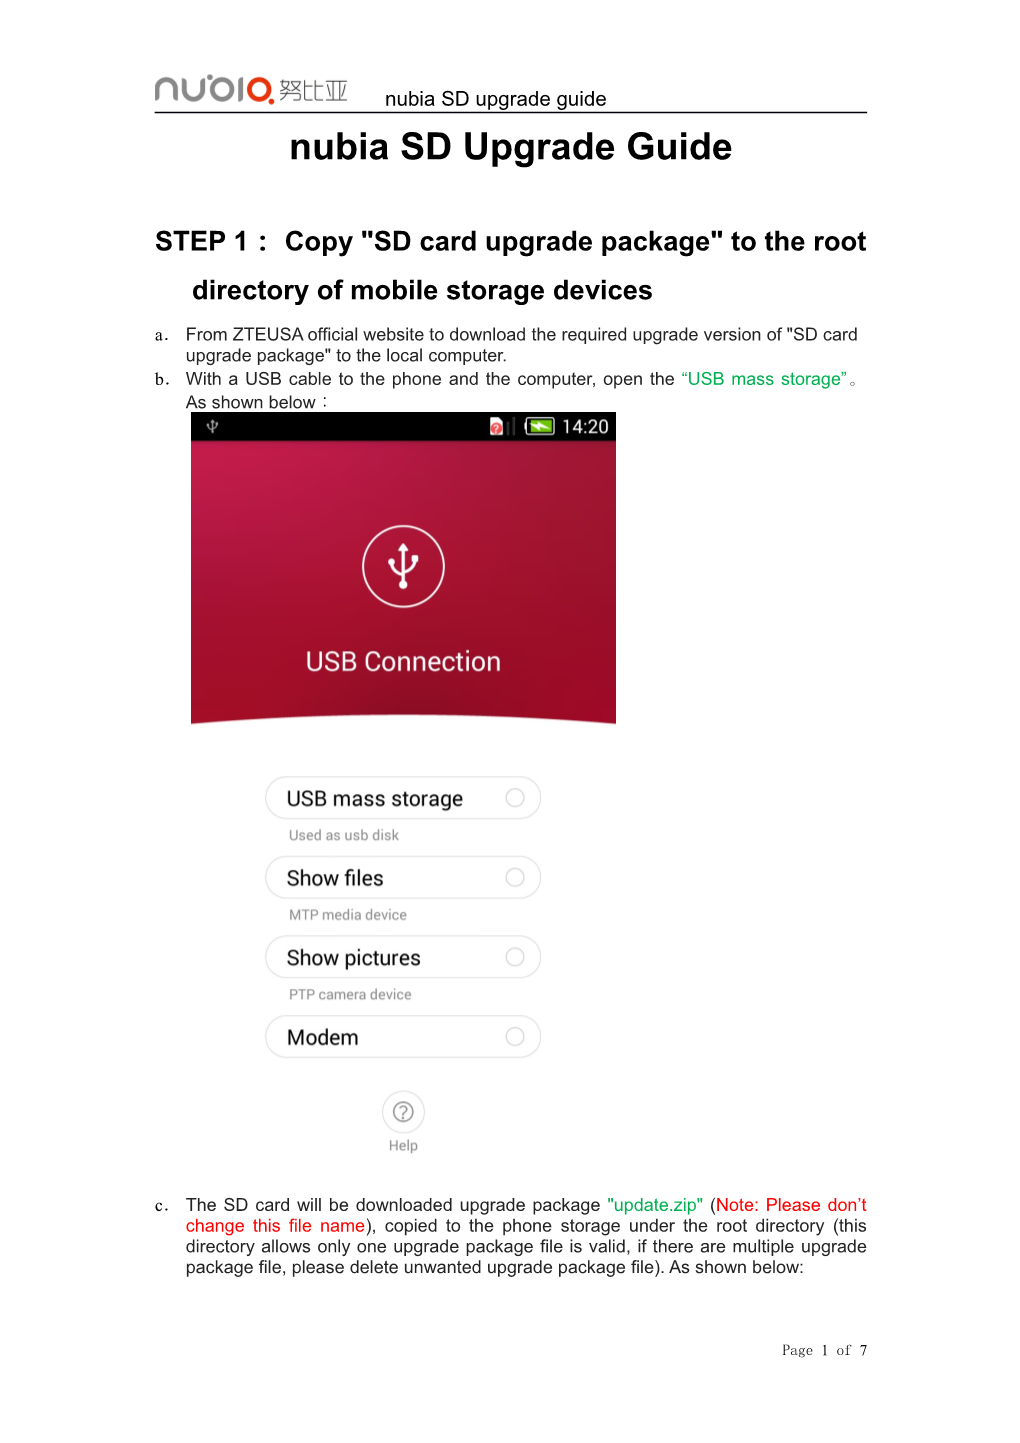 1 STEP 1 Copy SD Card Upgrade Package to the Root Directory of Mobile Storage Devices